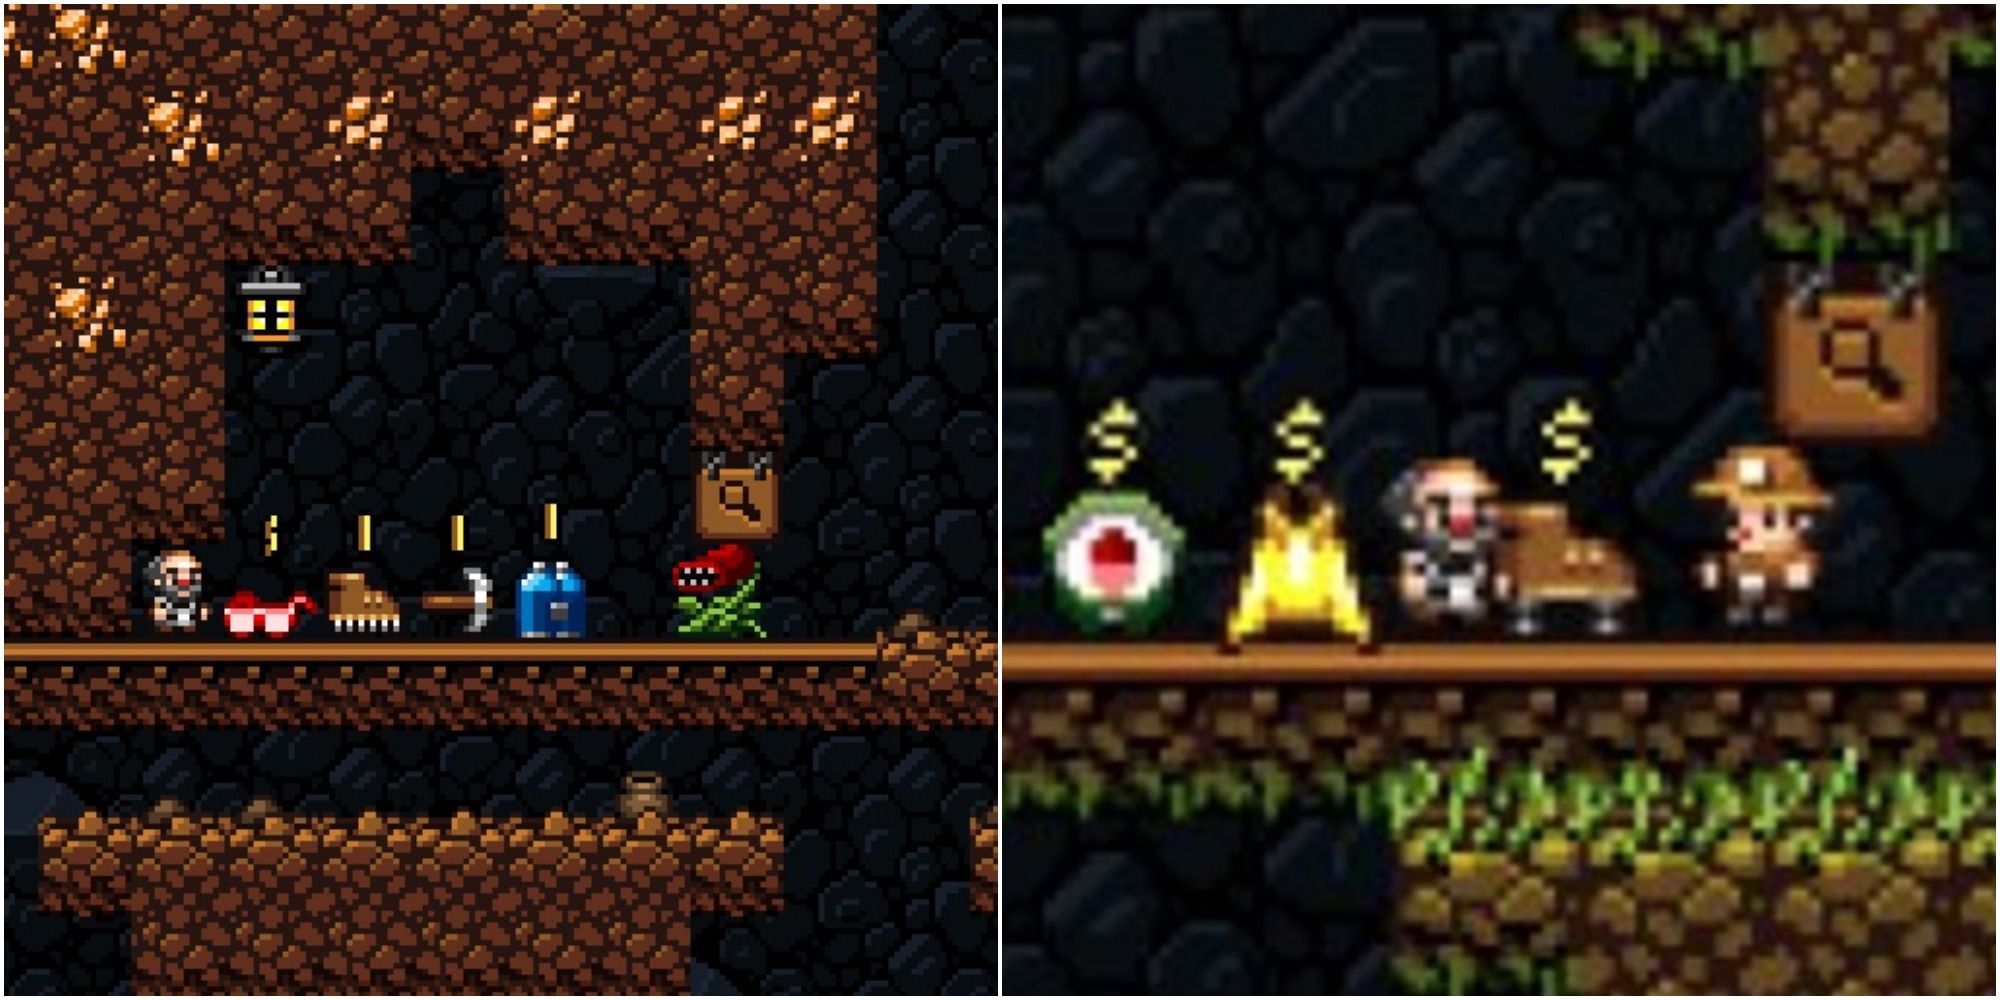 Spelunky 2 mod turns one of the best roguelikes ever into a